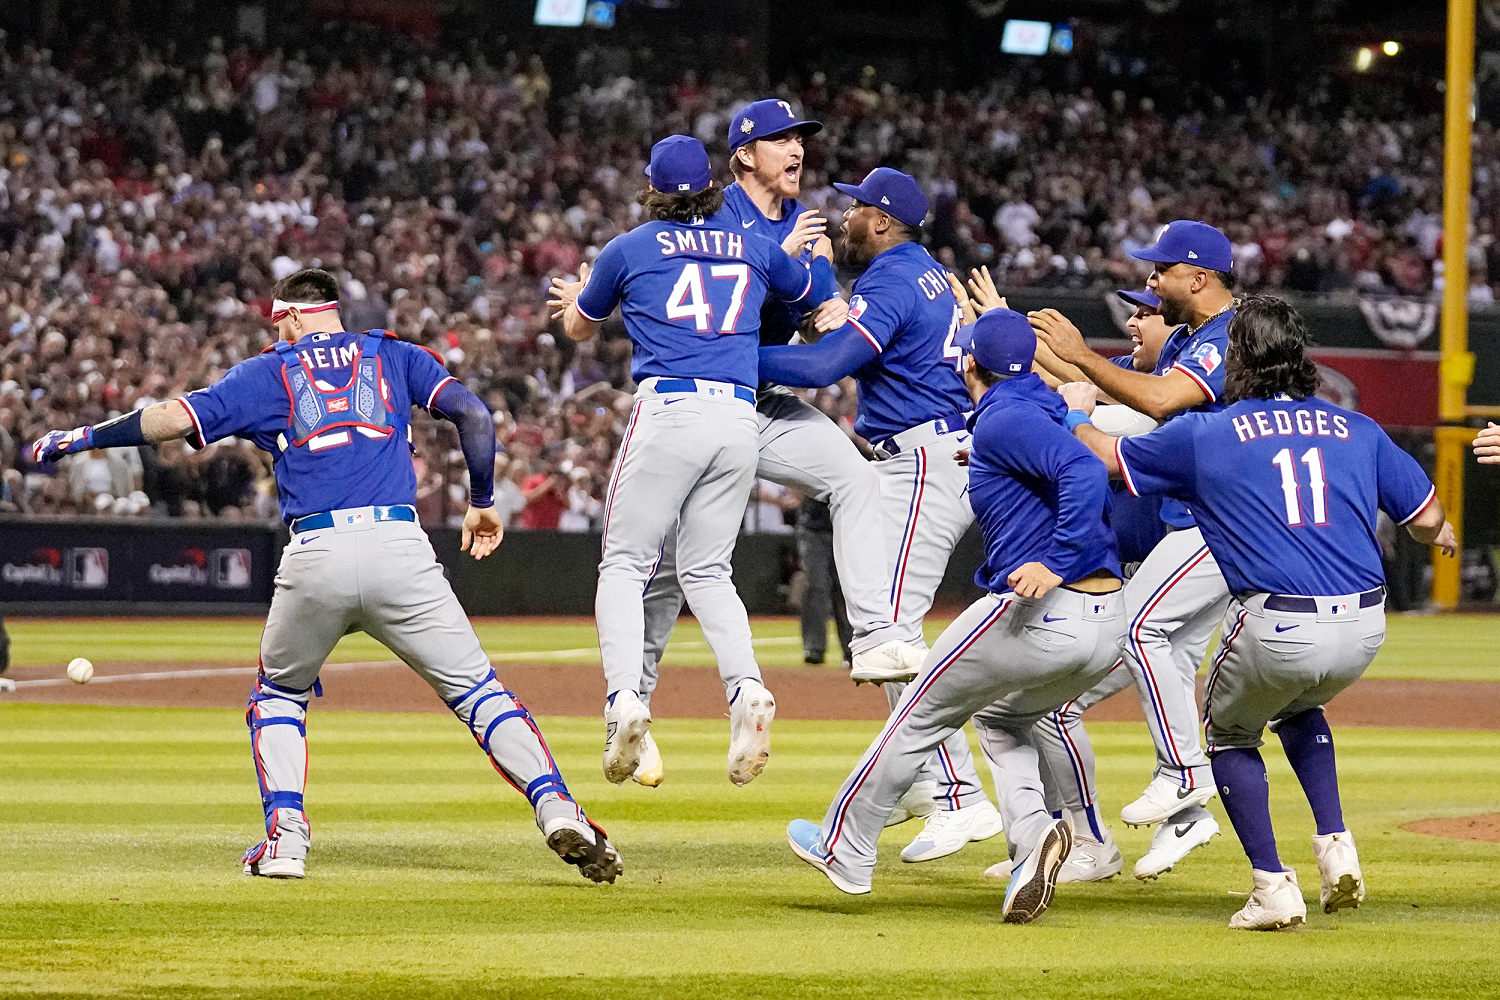 Texas Rangers are World Series champs for first time in team’s 63-year history